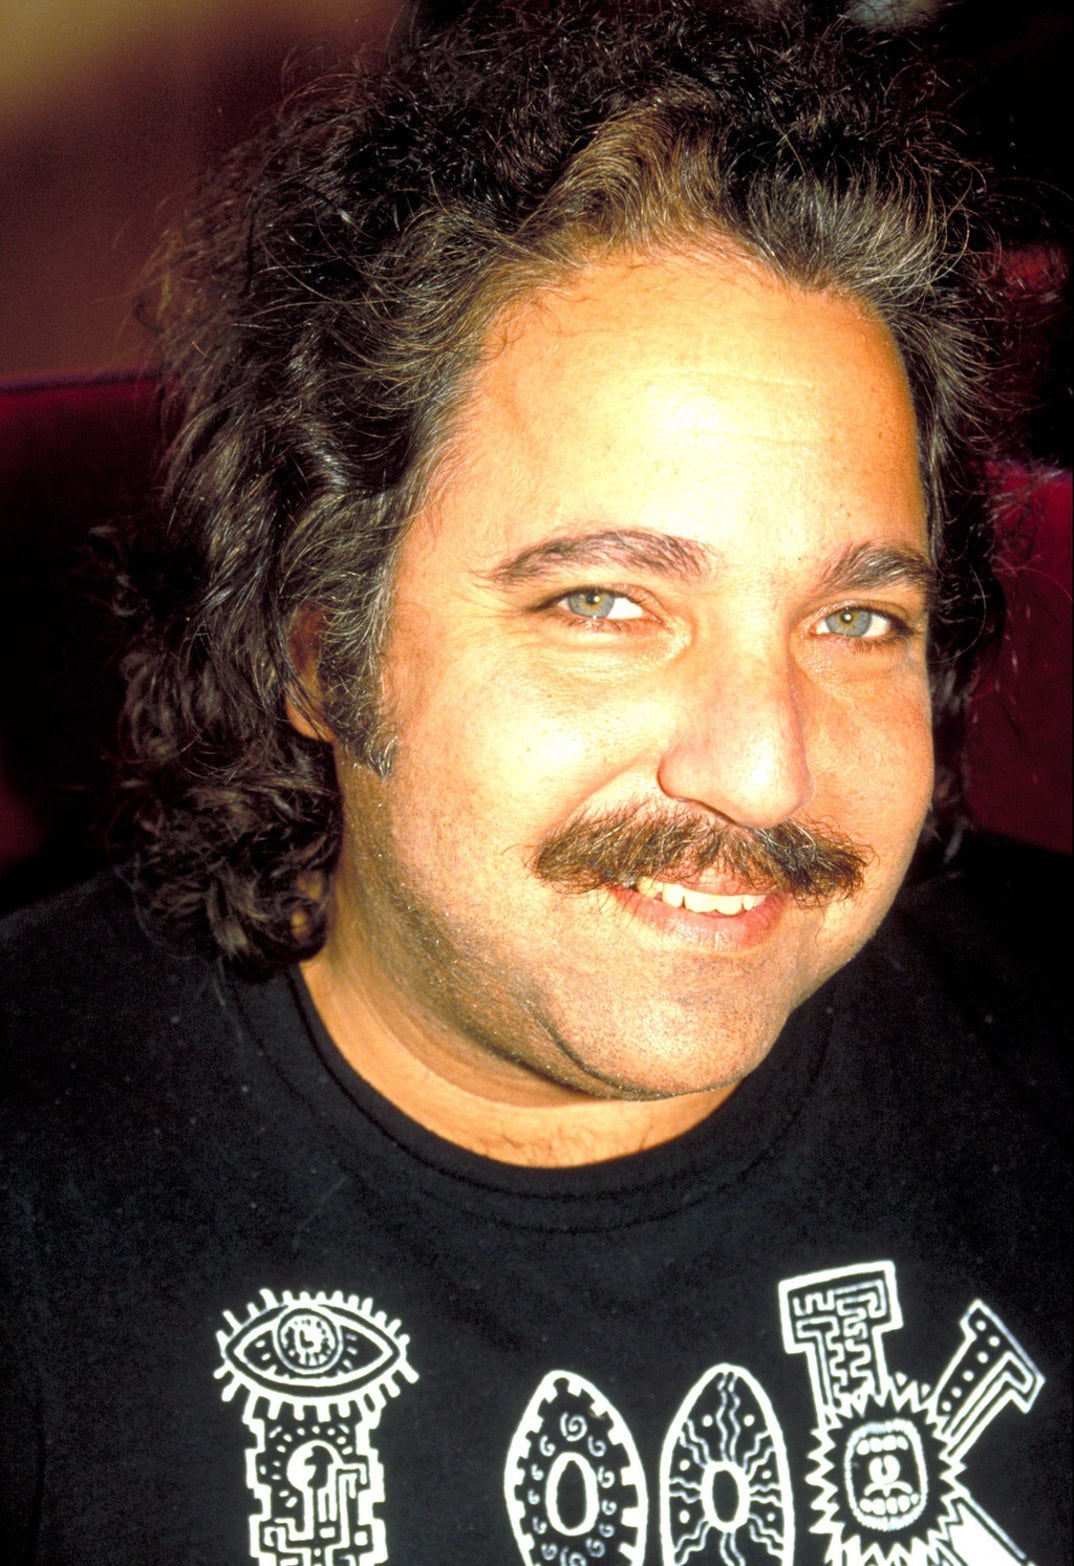 Best of Ron jeremy when he was young